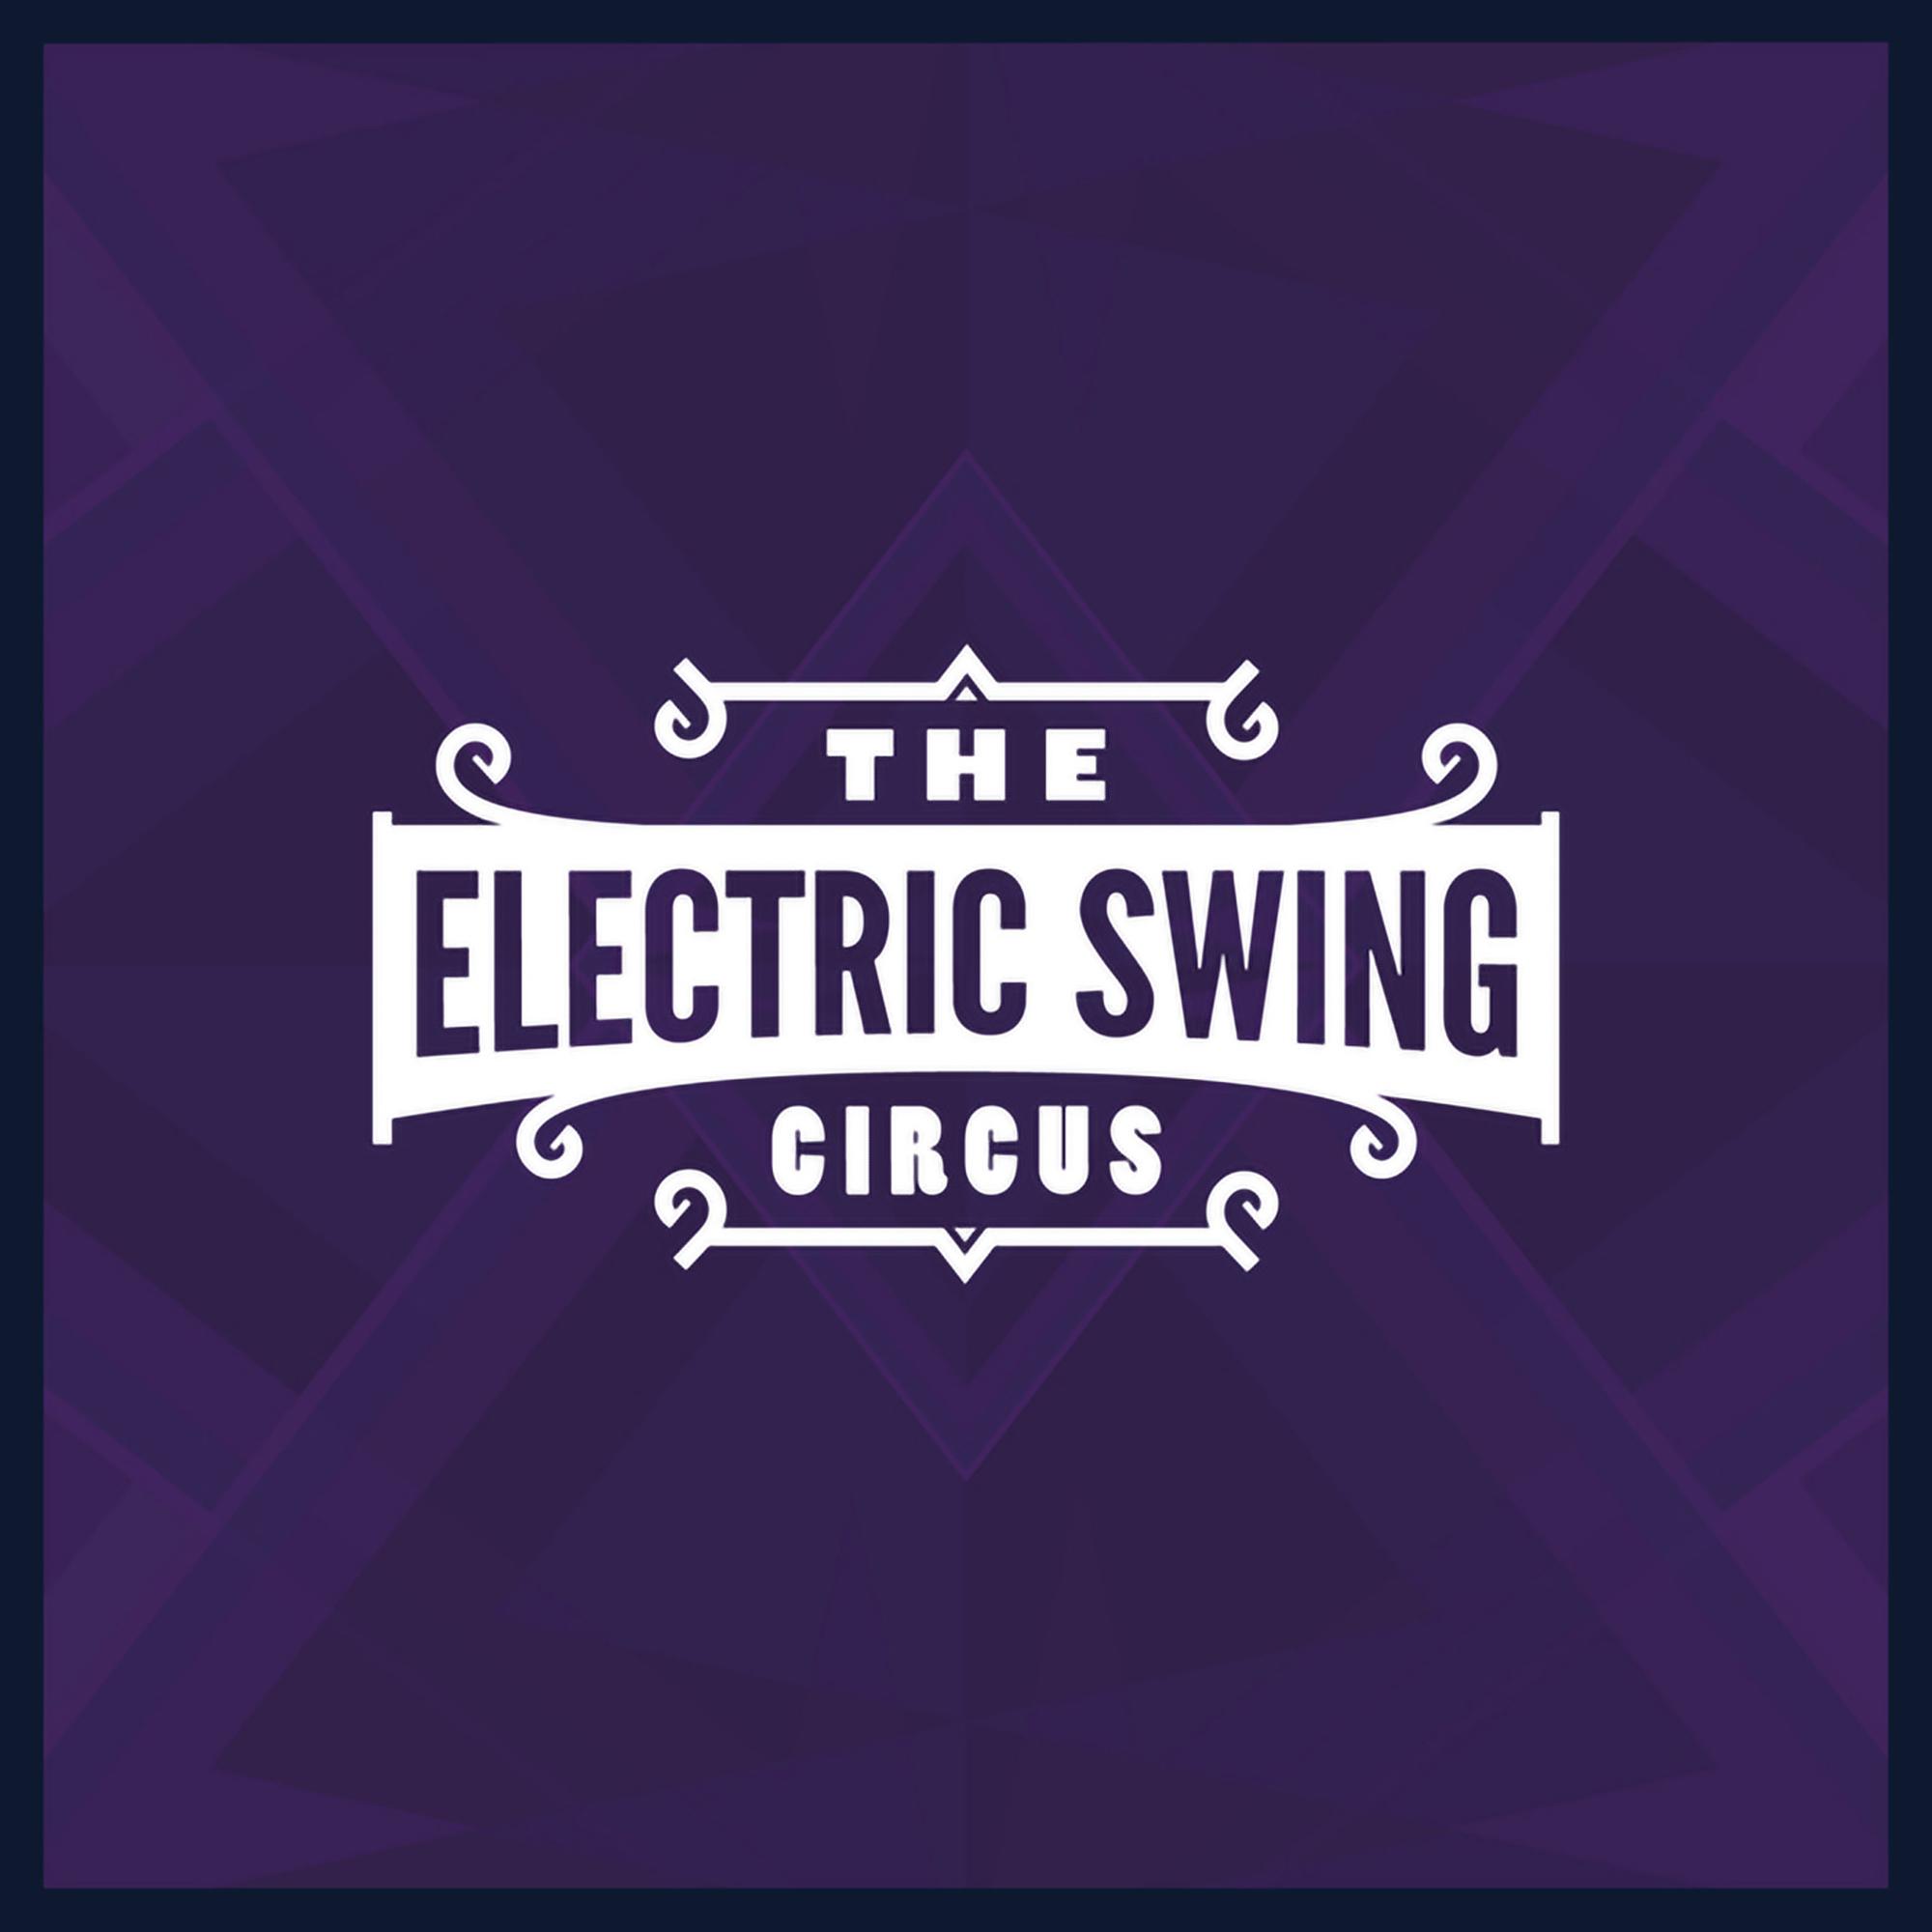 The Electric Swing Circus - Mellifluous